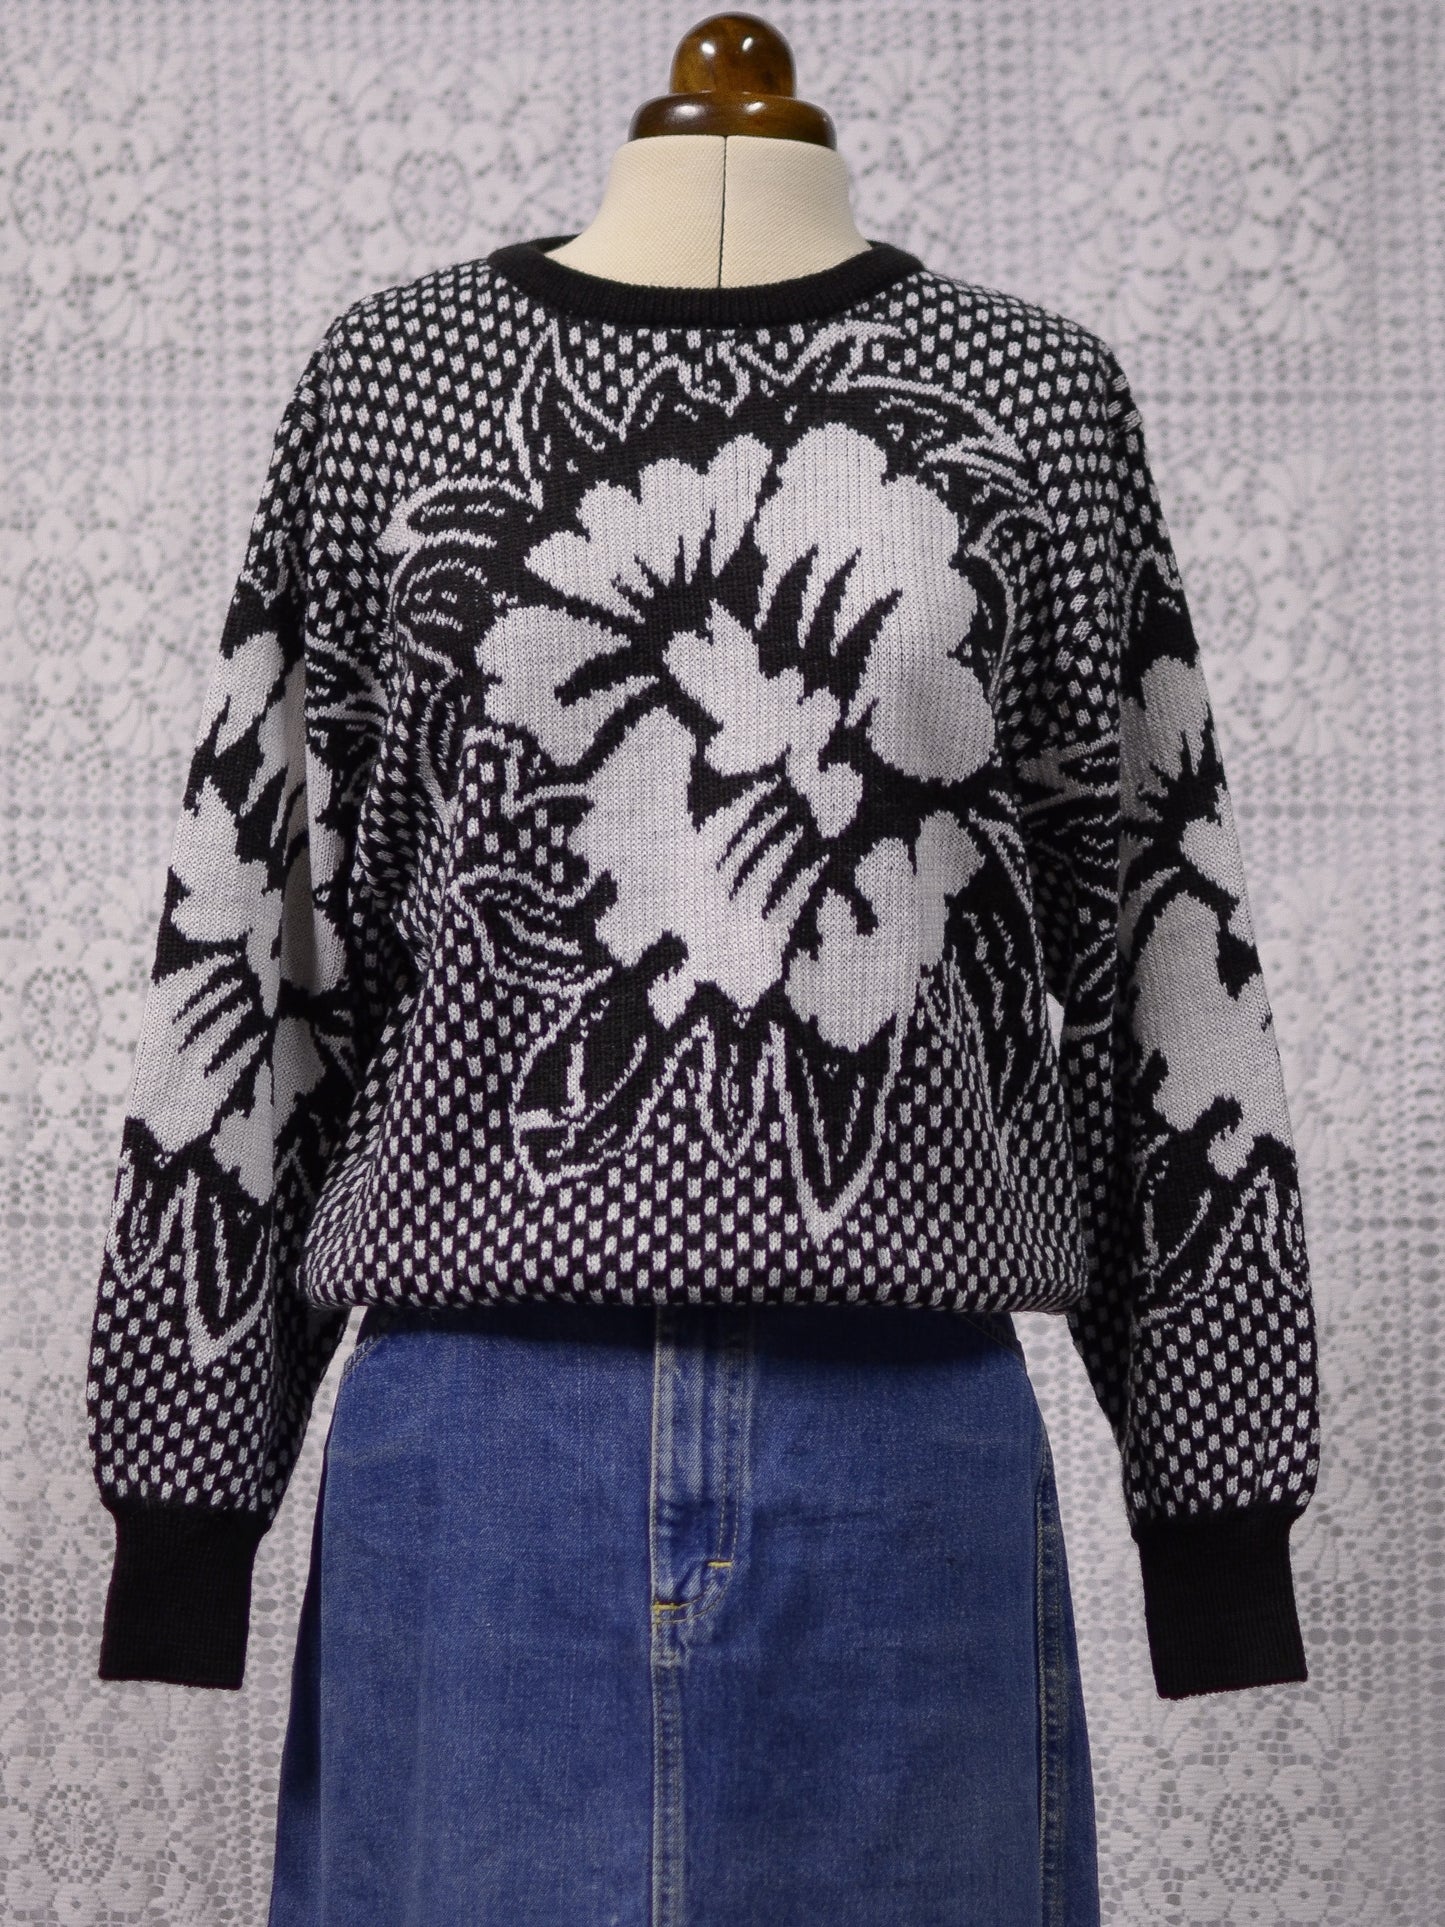 1990s black and white flower motif graphic jumper